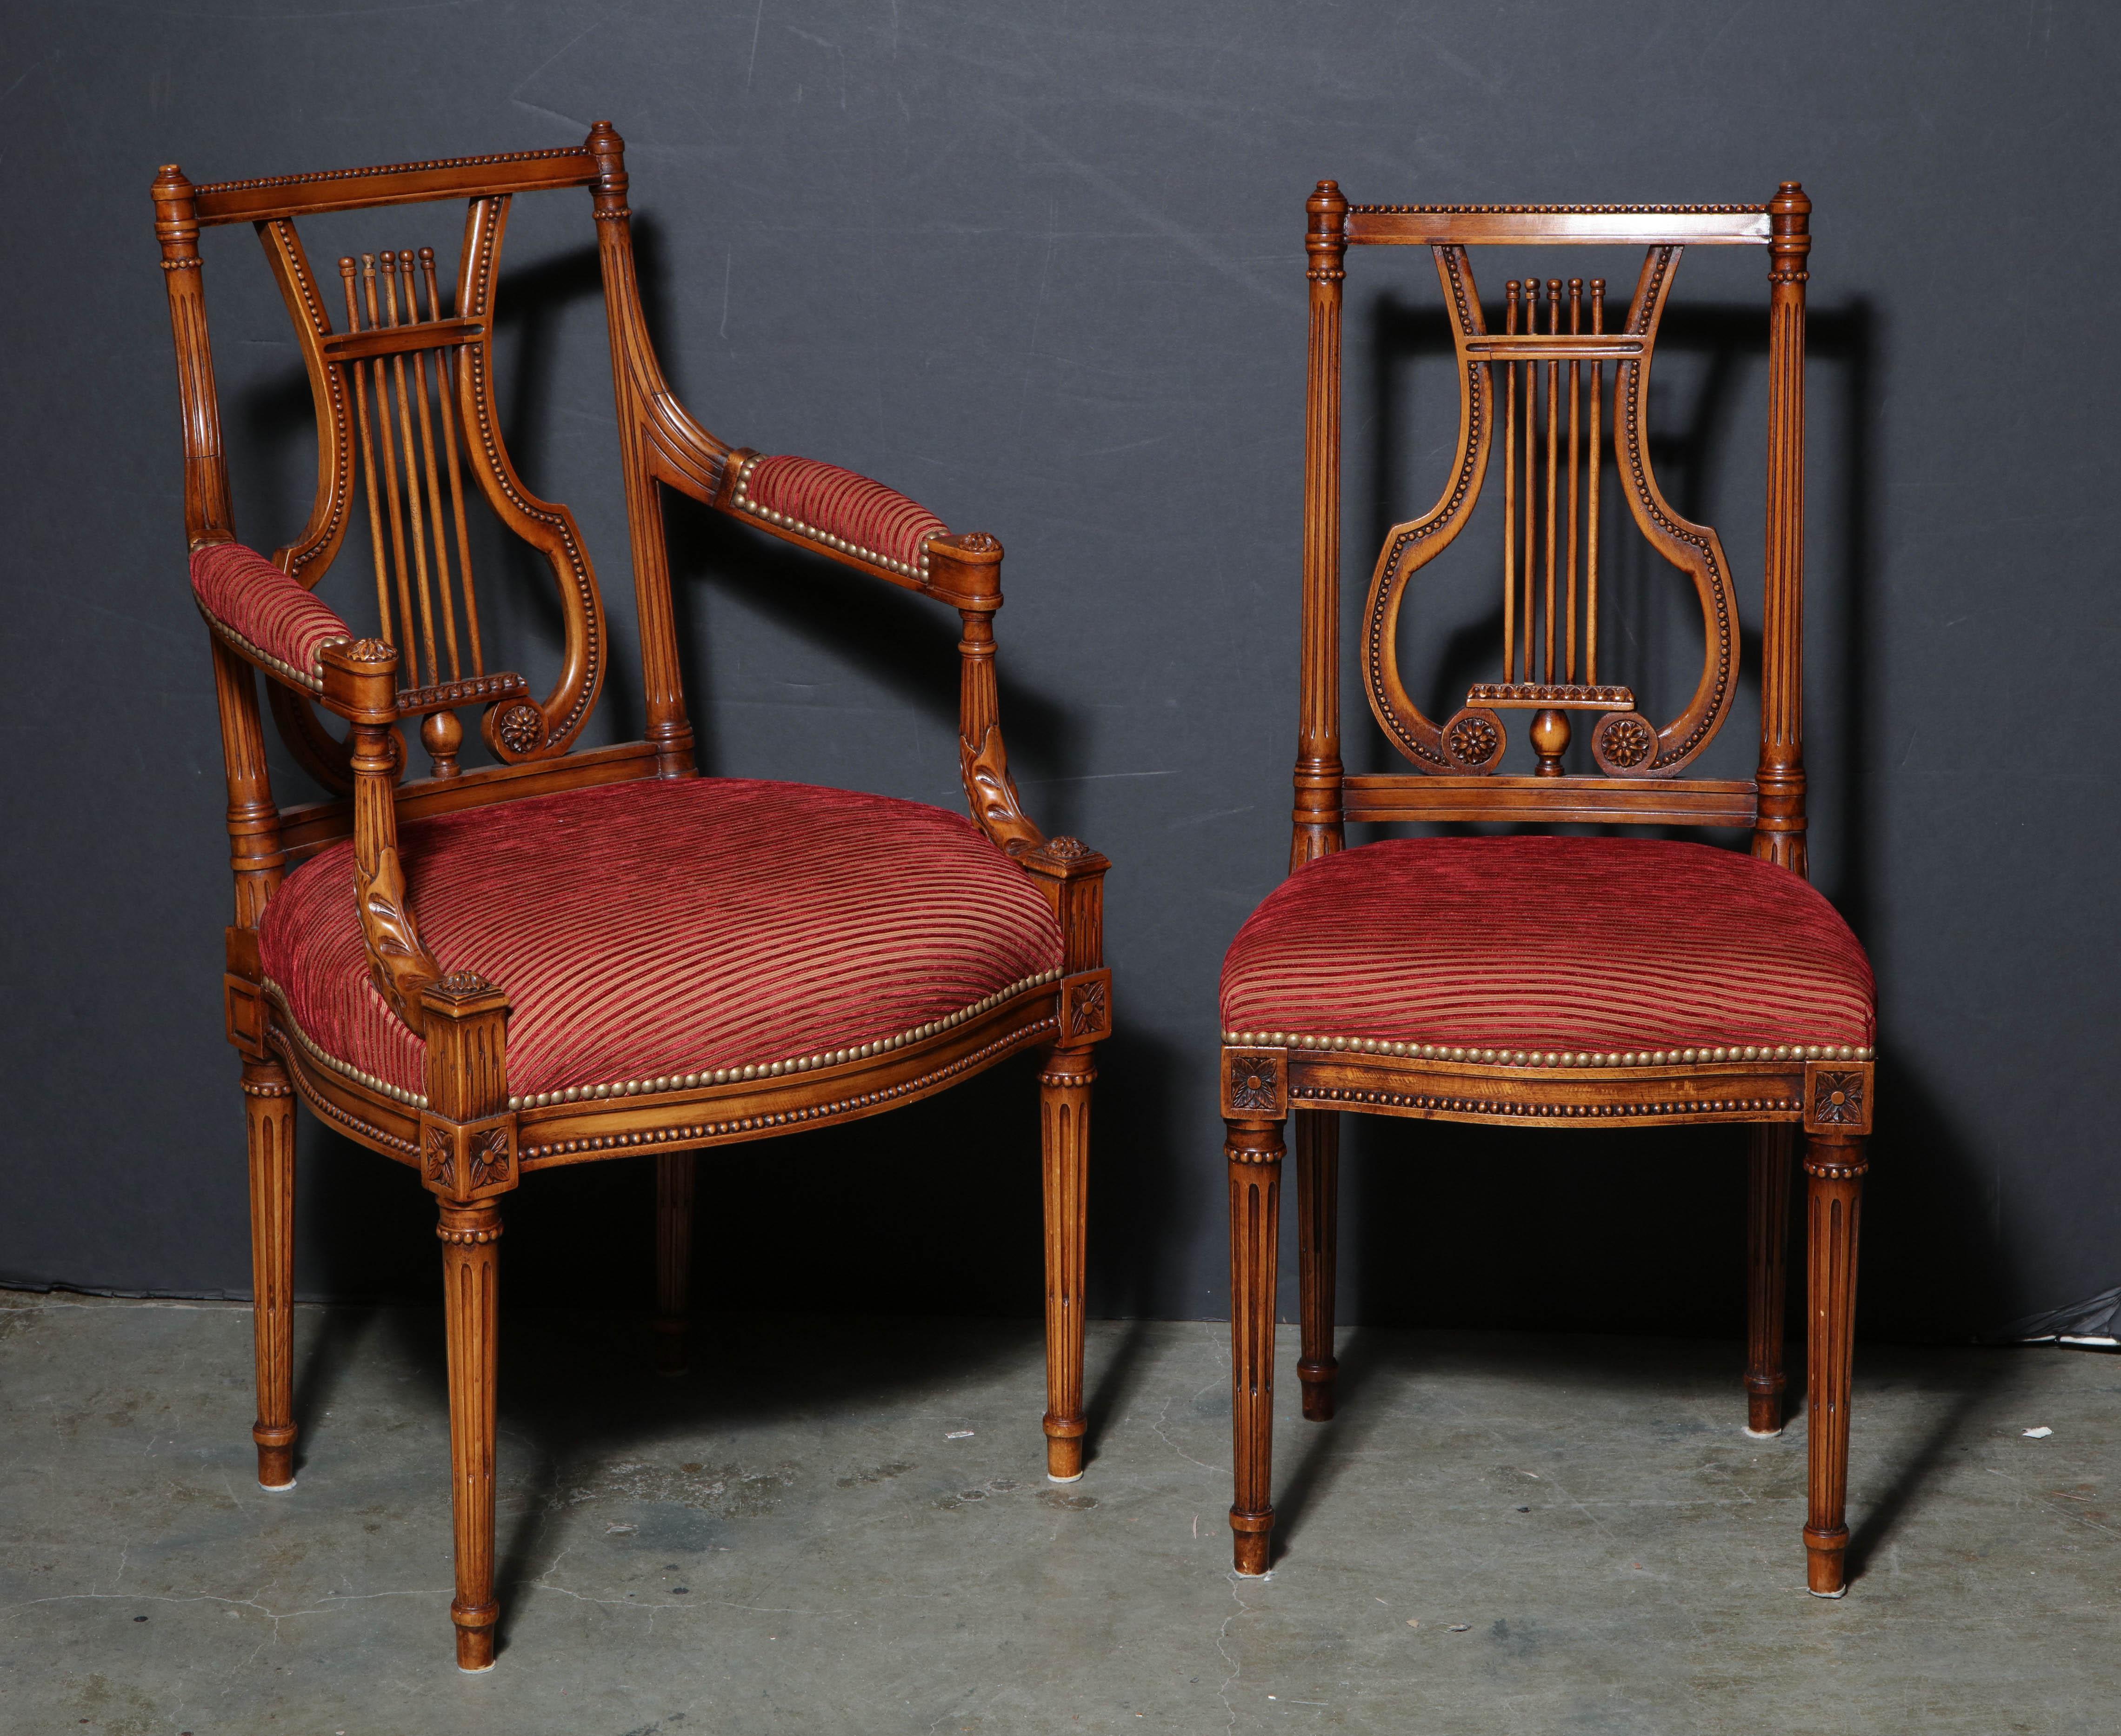 A fine set of 12 Louis XVI style carved mahogany dining chairs, with carved lyre form backrests, fluted supports, arms and legs and an upholstered padded cushion.